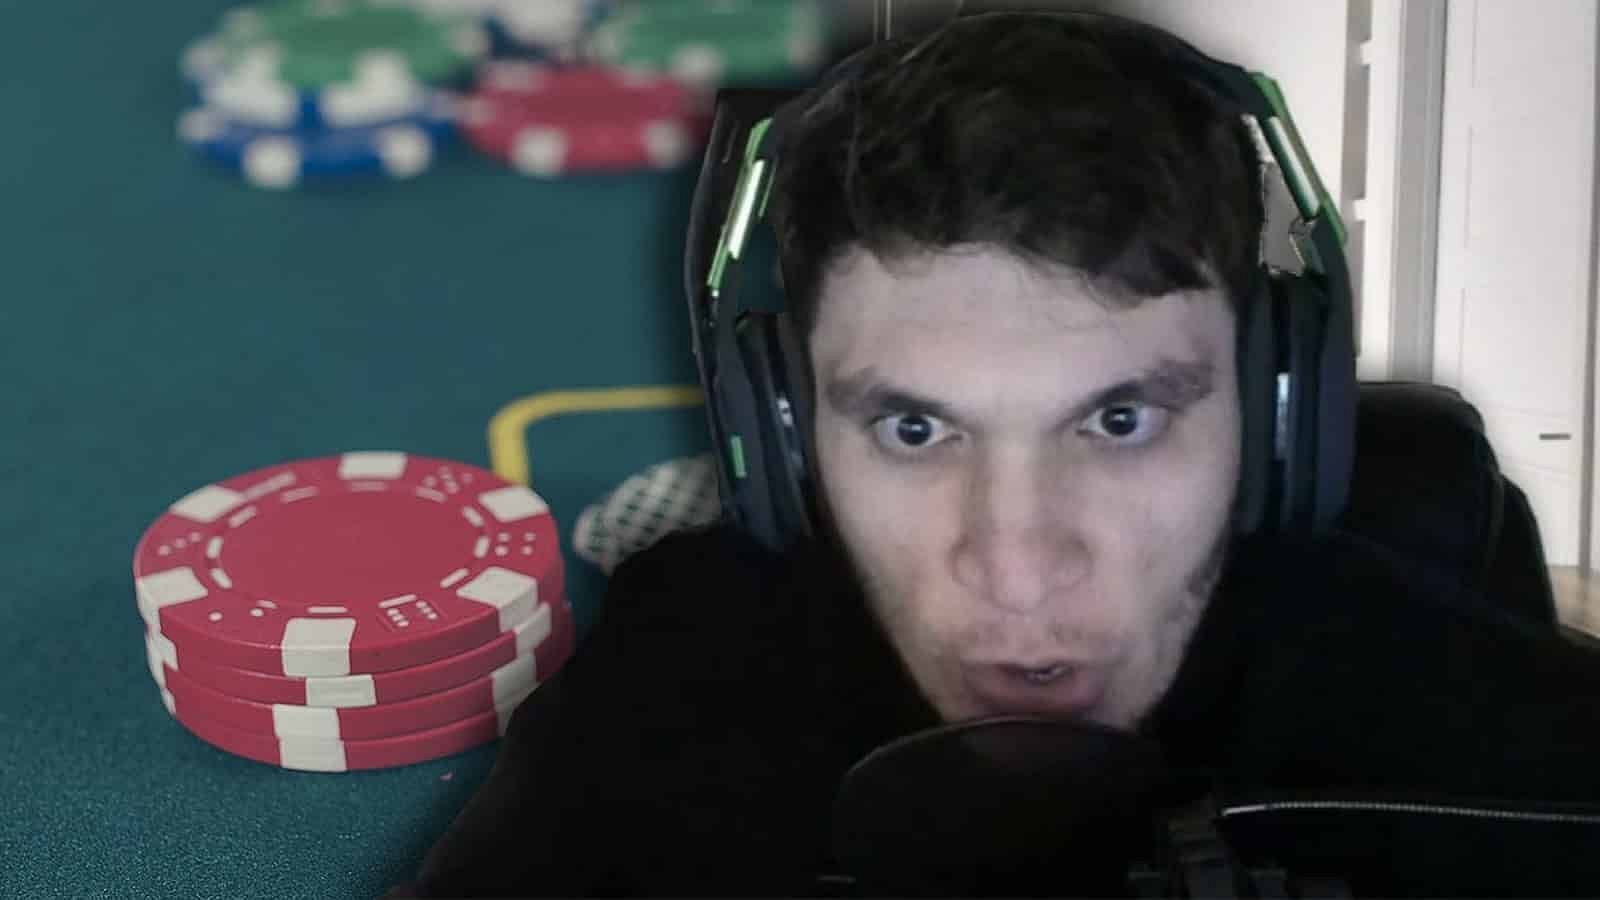 Trainwrecks lashes out at Minecraft stans (Image via ginx.tv)